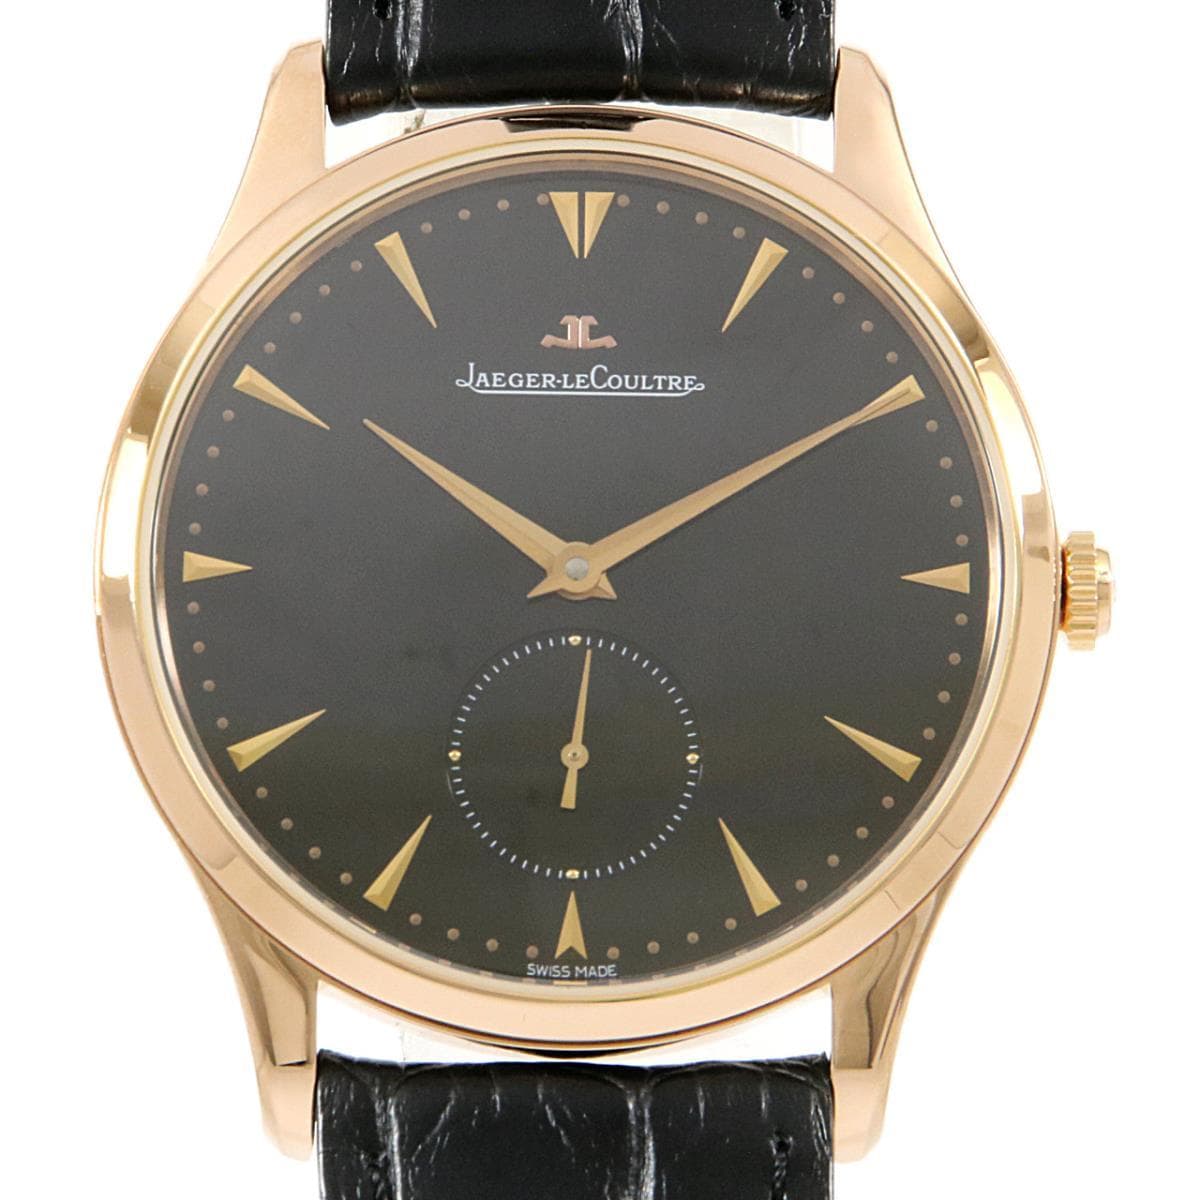 Jaeger-LeCoultre 174.2.90. S/Q1352470 Master Grand Ultra Slim PG Automatic